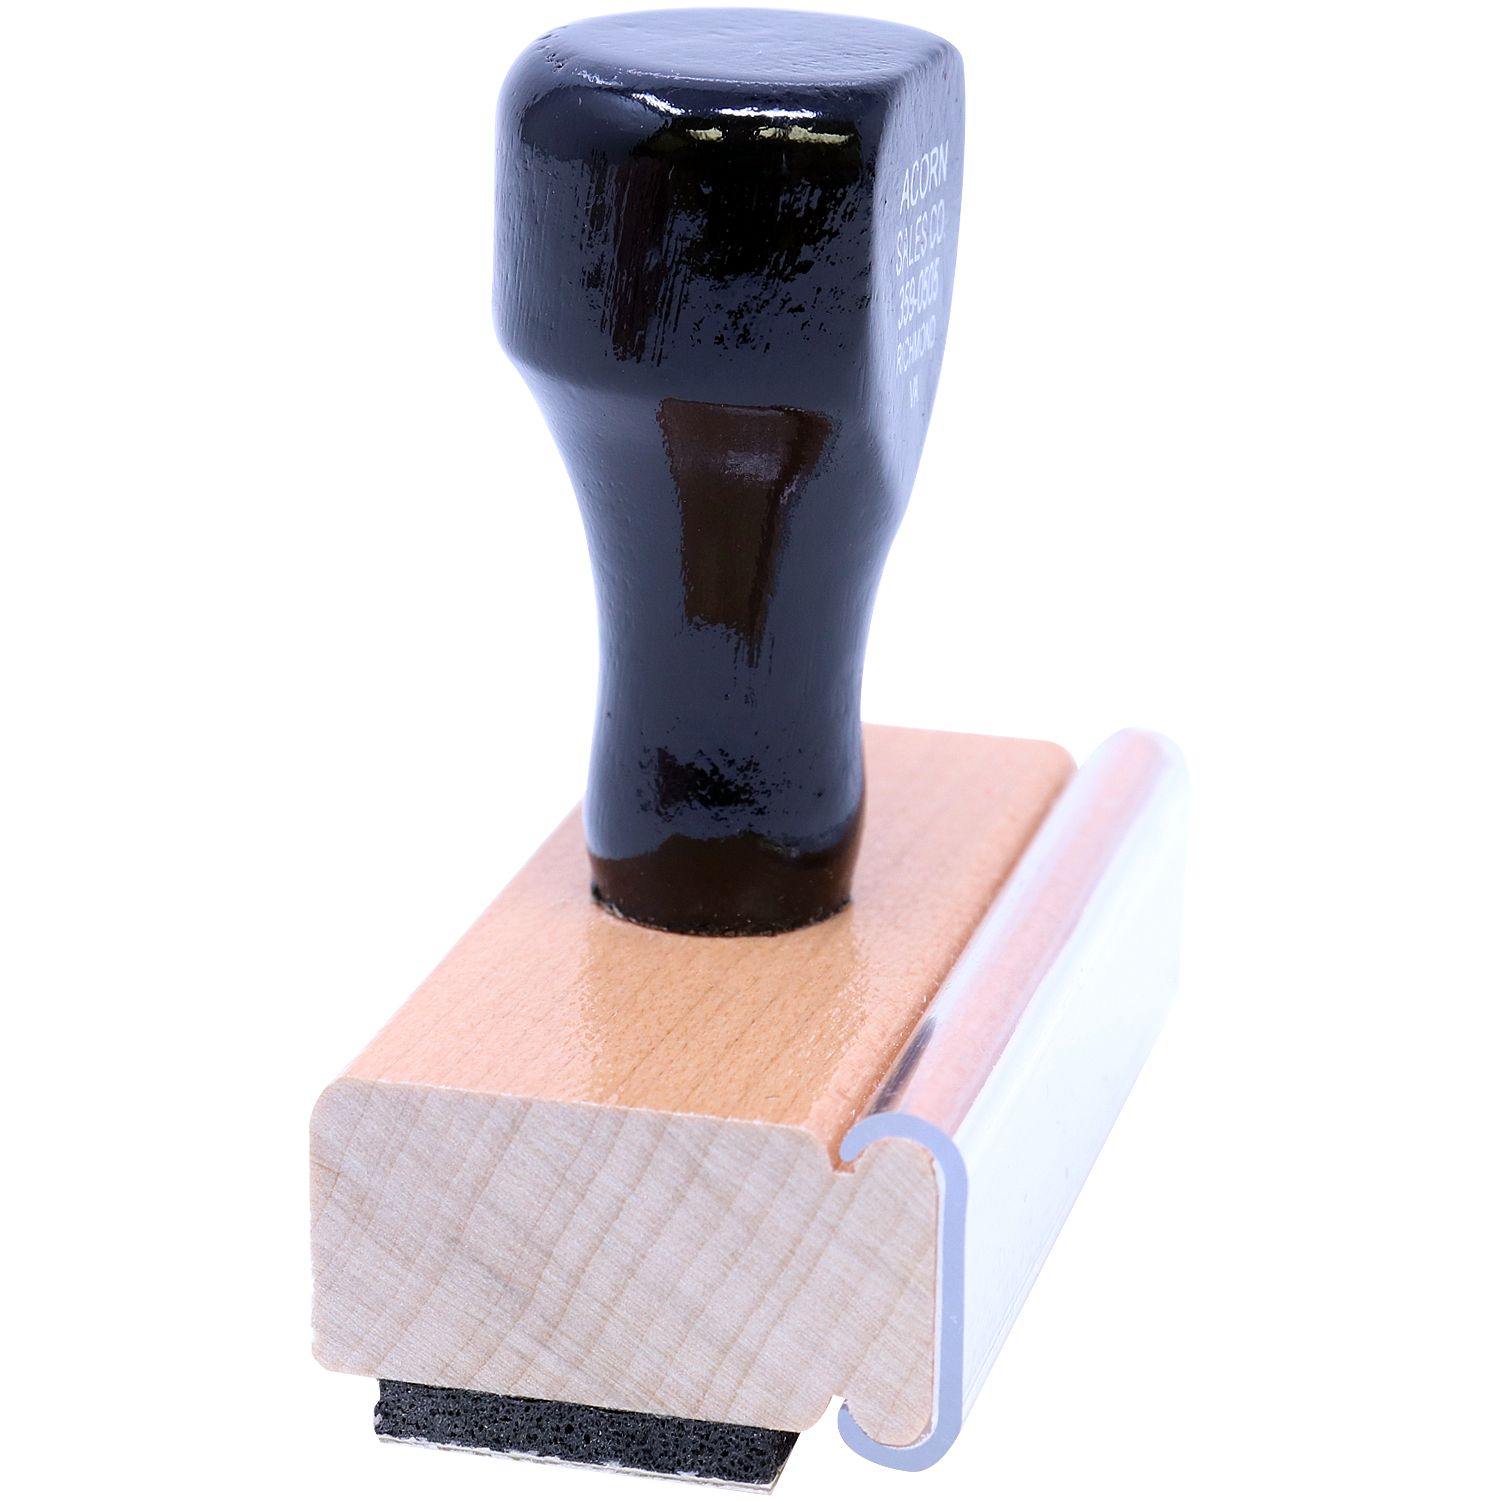 Side View of Chart Thinned On Rubber Stamp at an Angle